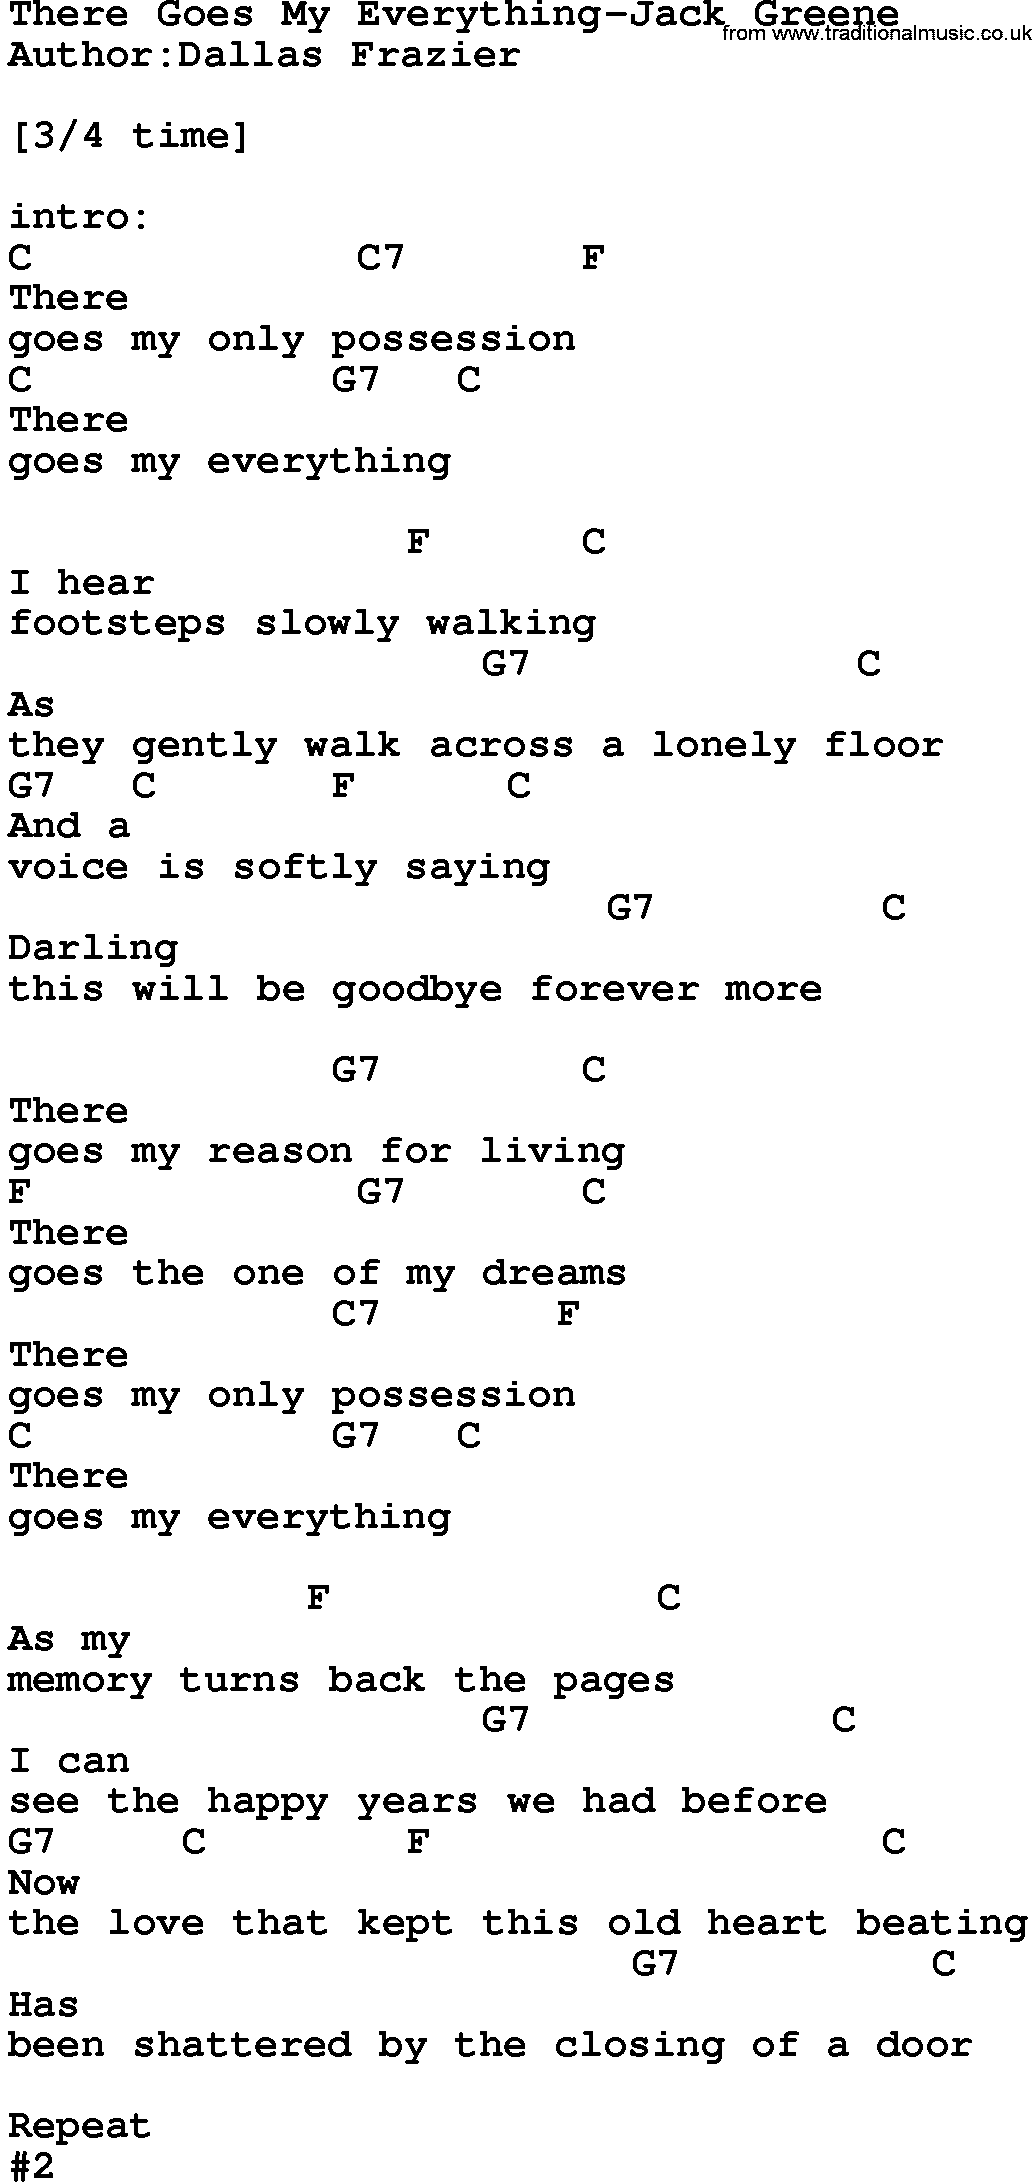 Country music song: There Goes My Everything-Jack Greene lyrics and chords